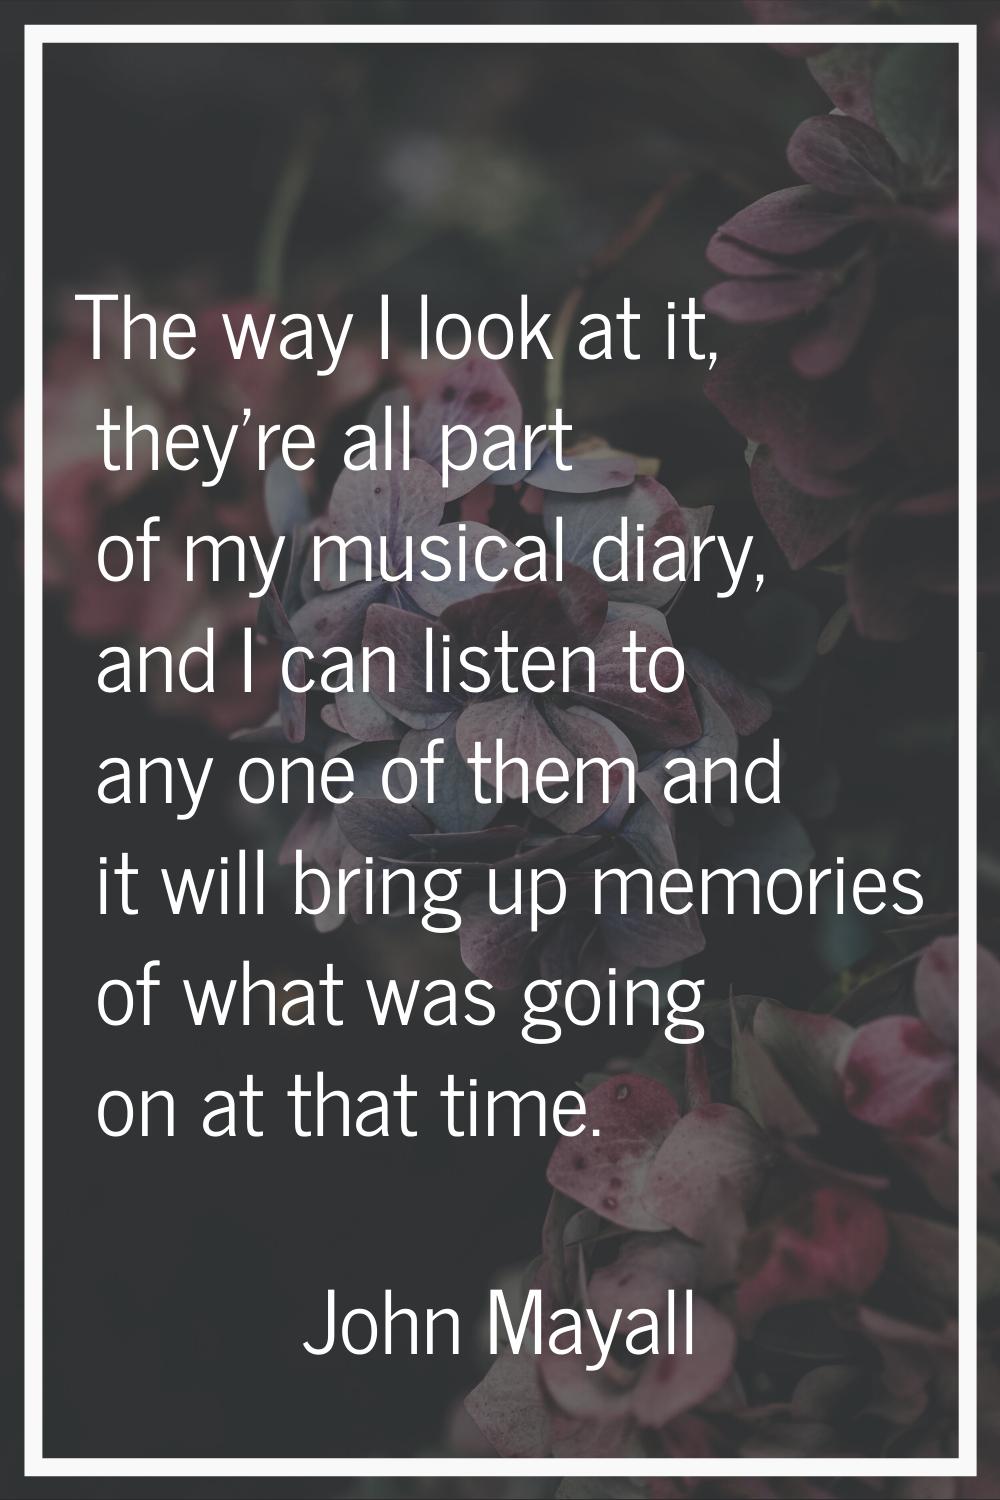 The way I look at it, they're all part of my musical diary, and I can listen to any one of them and